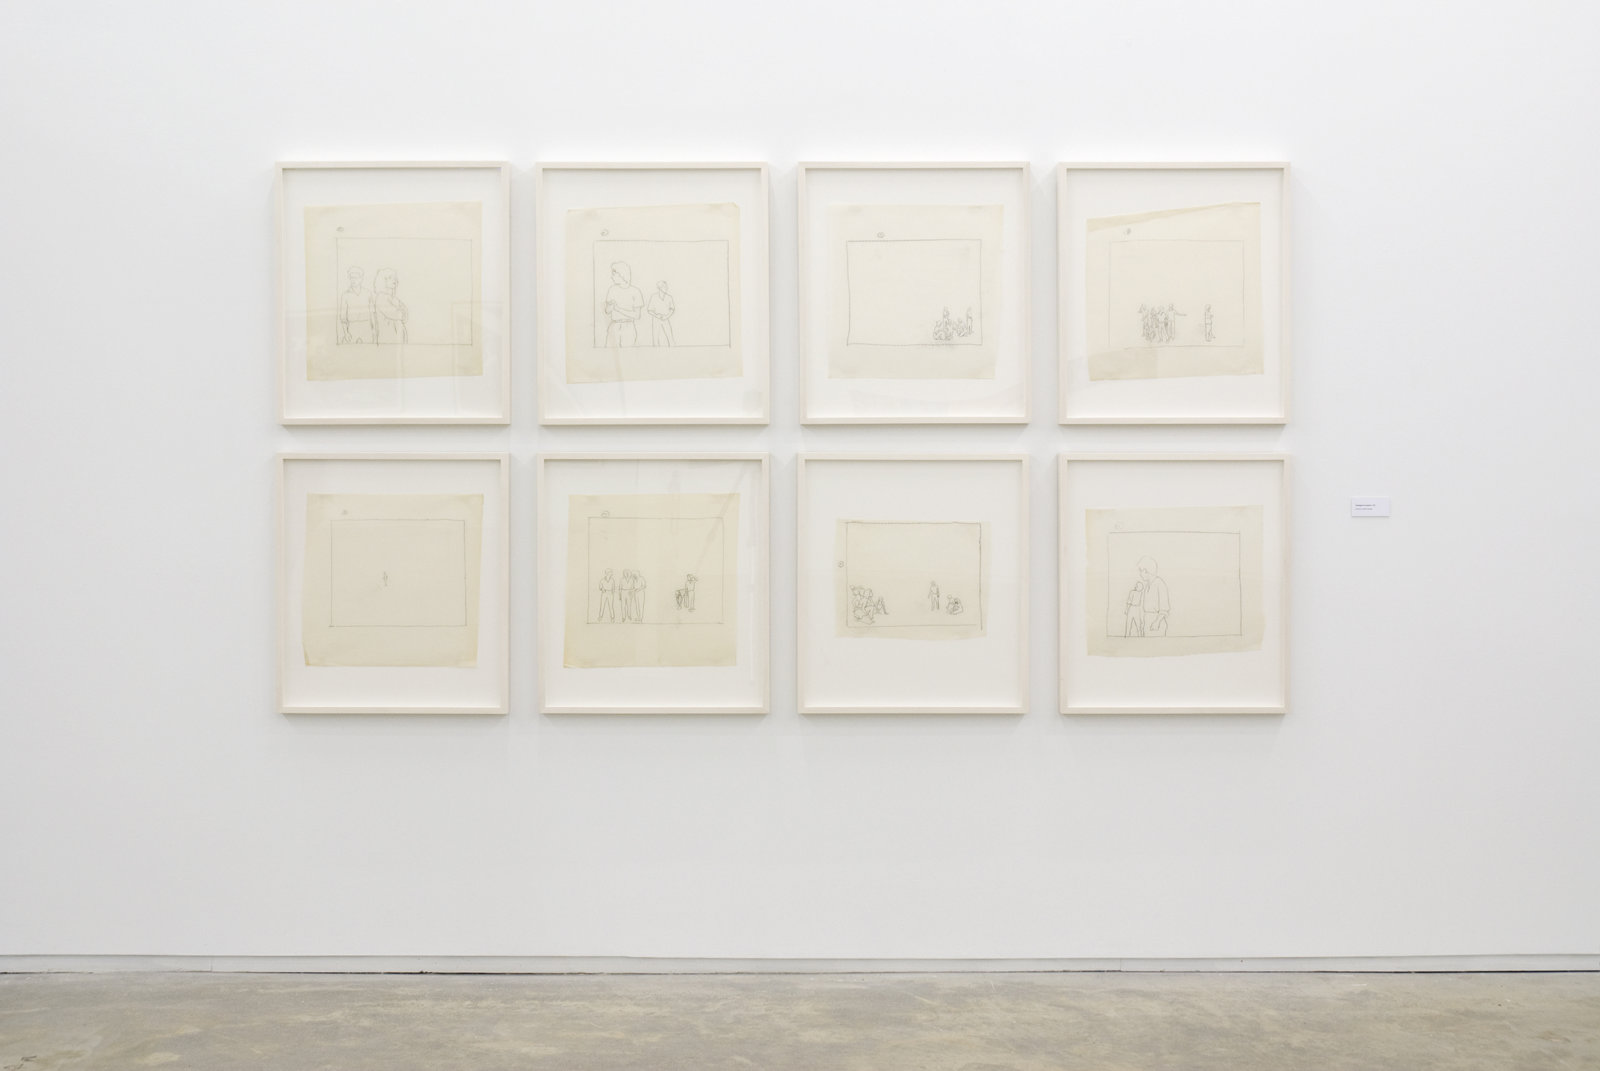 Ian Wallace, Tracings for Lookout, 1979, 8 pencil tracings on vellum, 27 x 24 in. (69 x 61 cm)